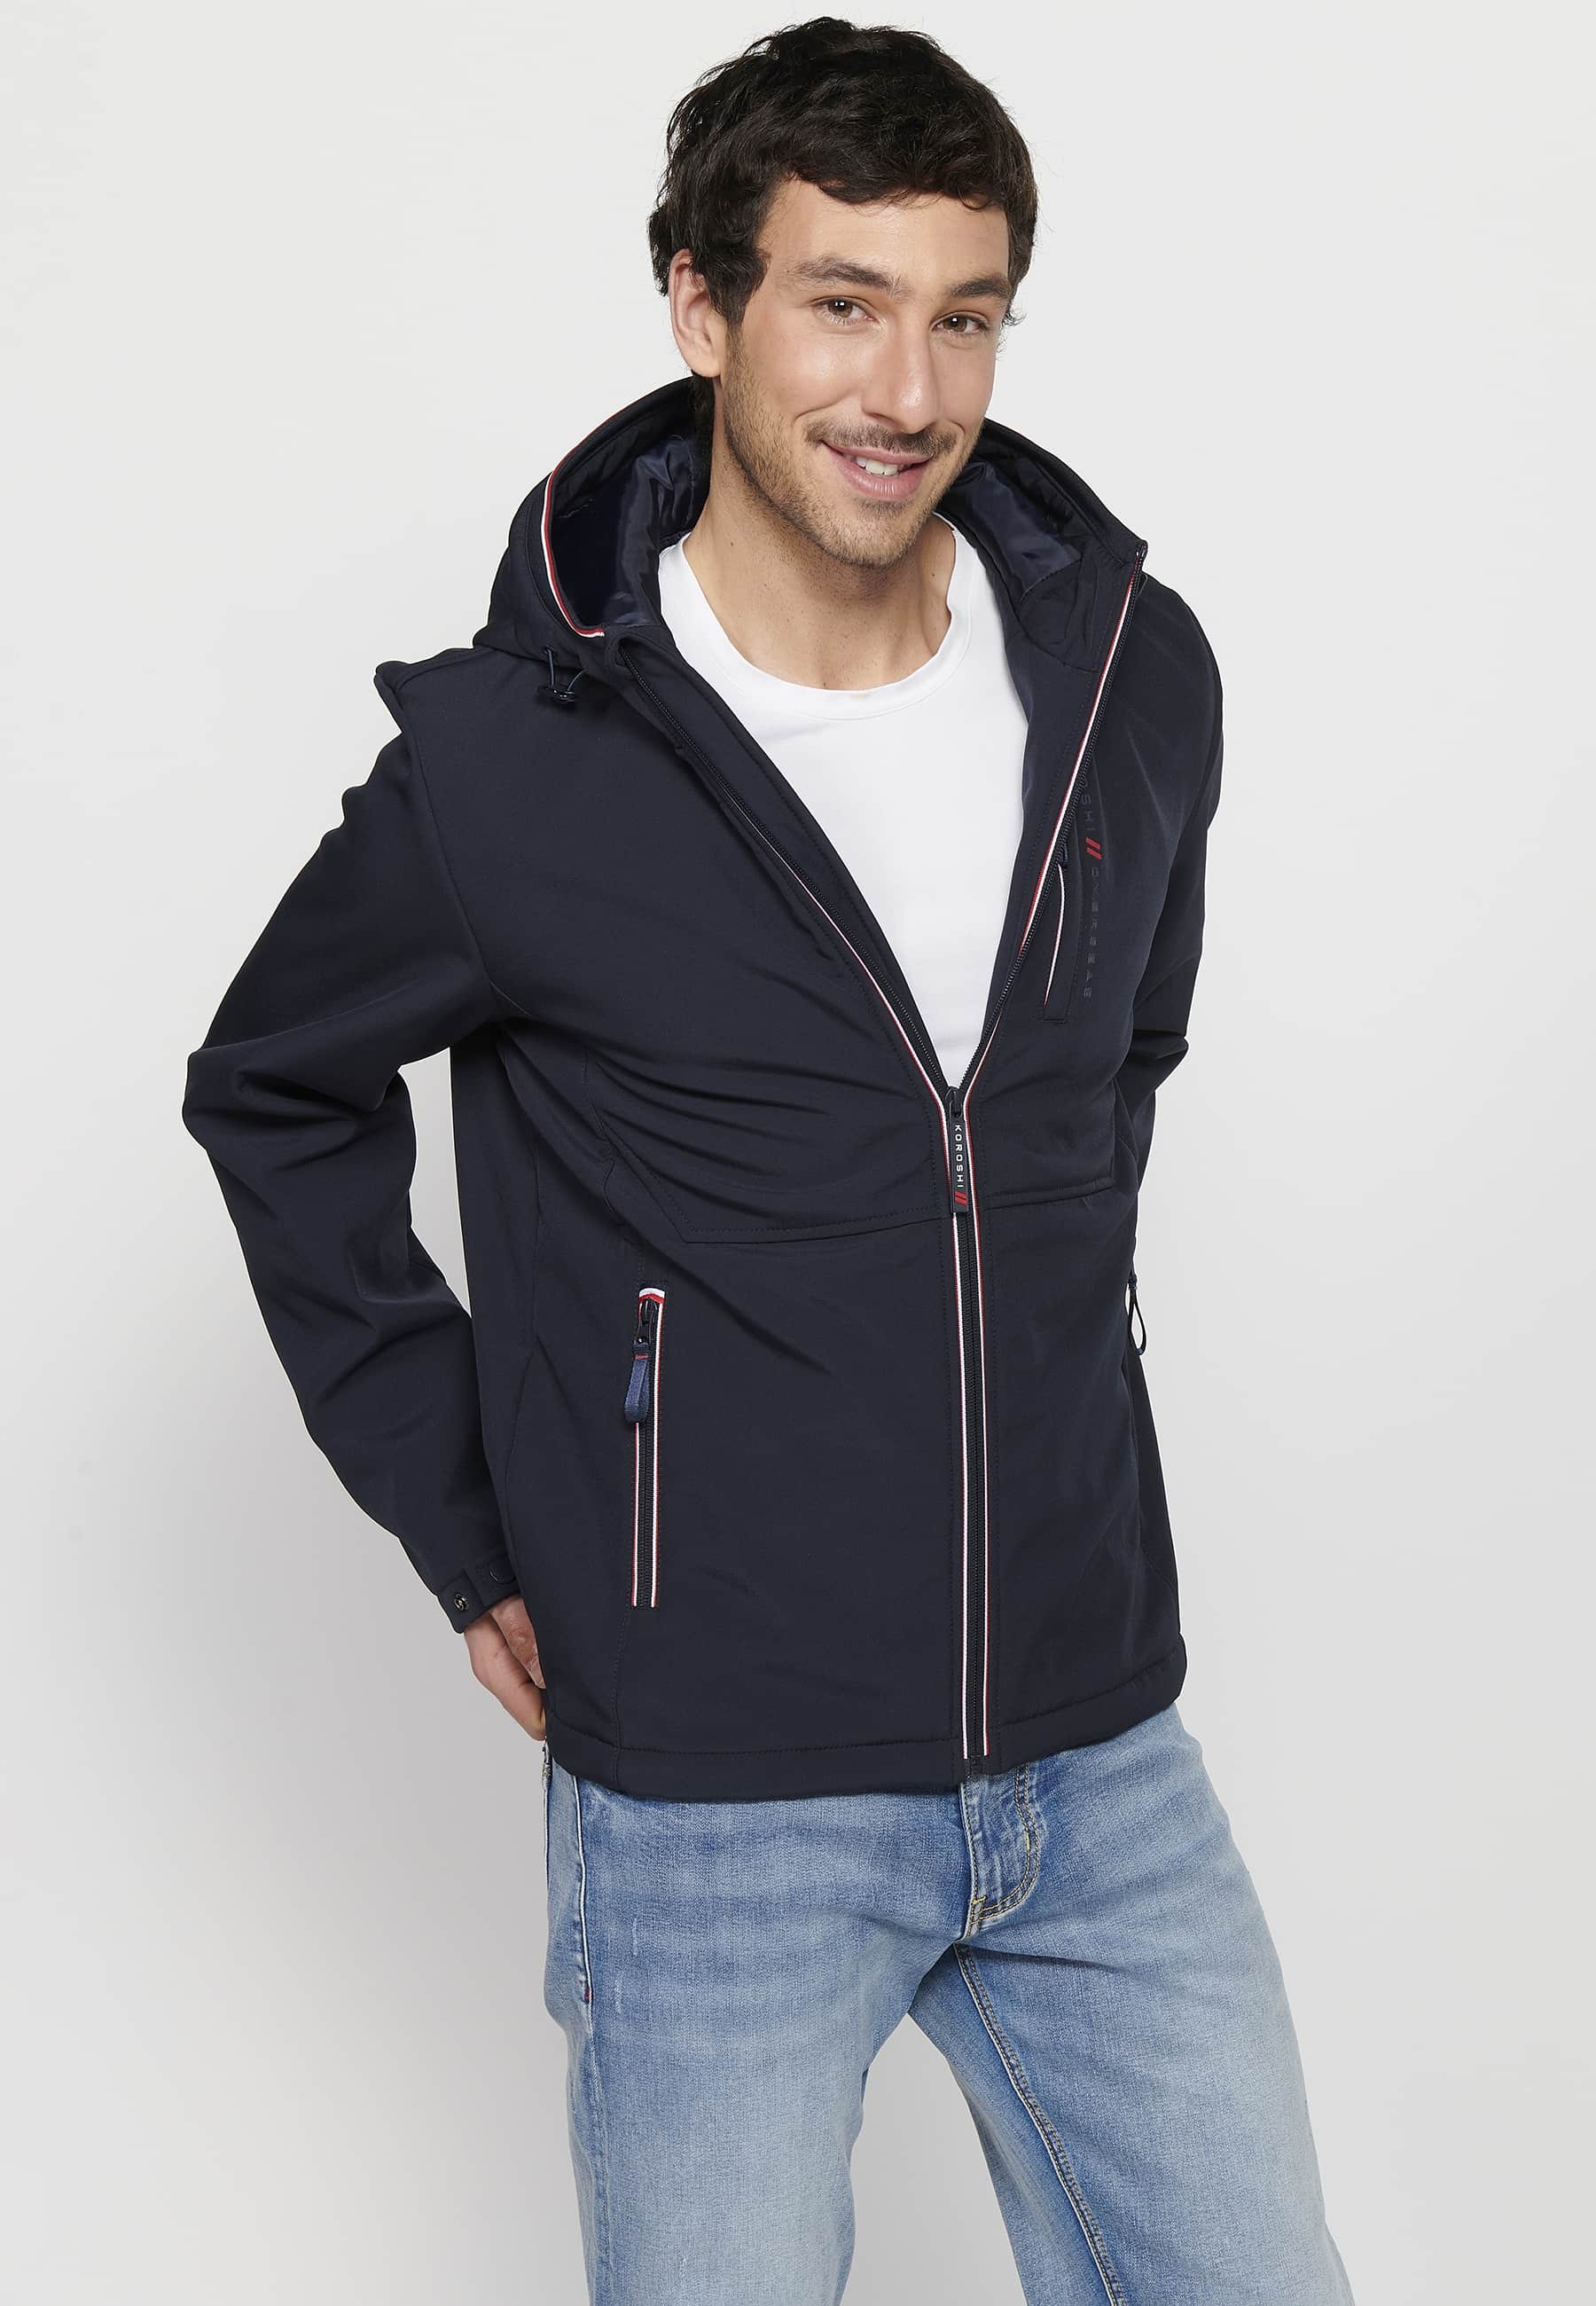 Navy Long Sleeve Jacket with Hooded Collar and Front Zipper Closure for Men 4